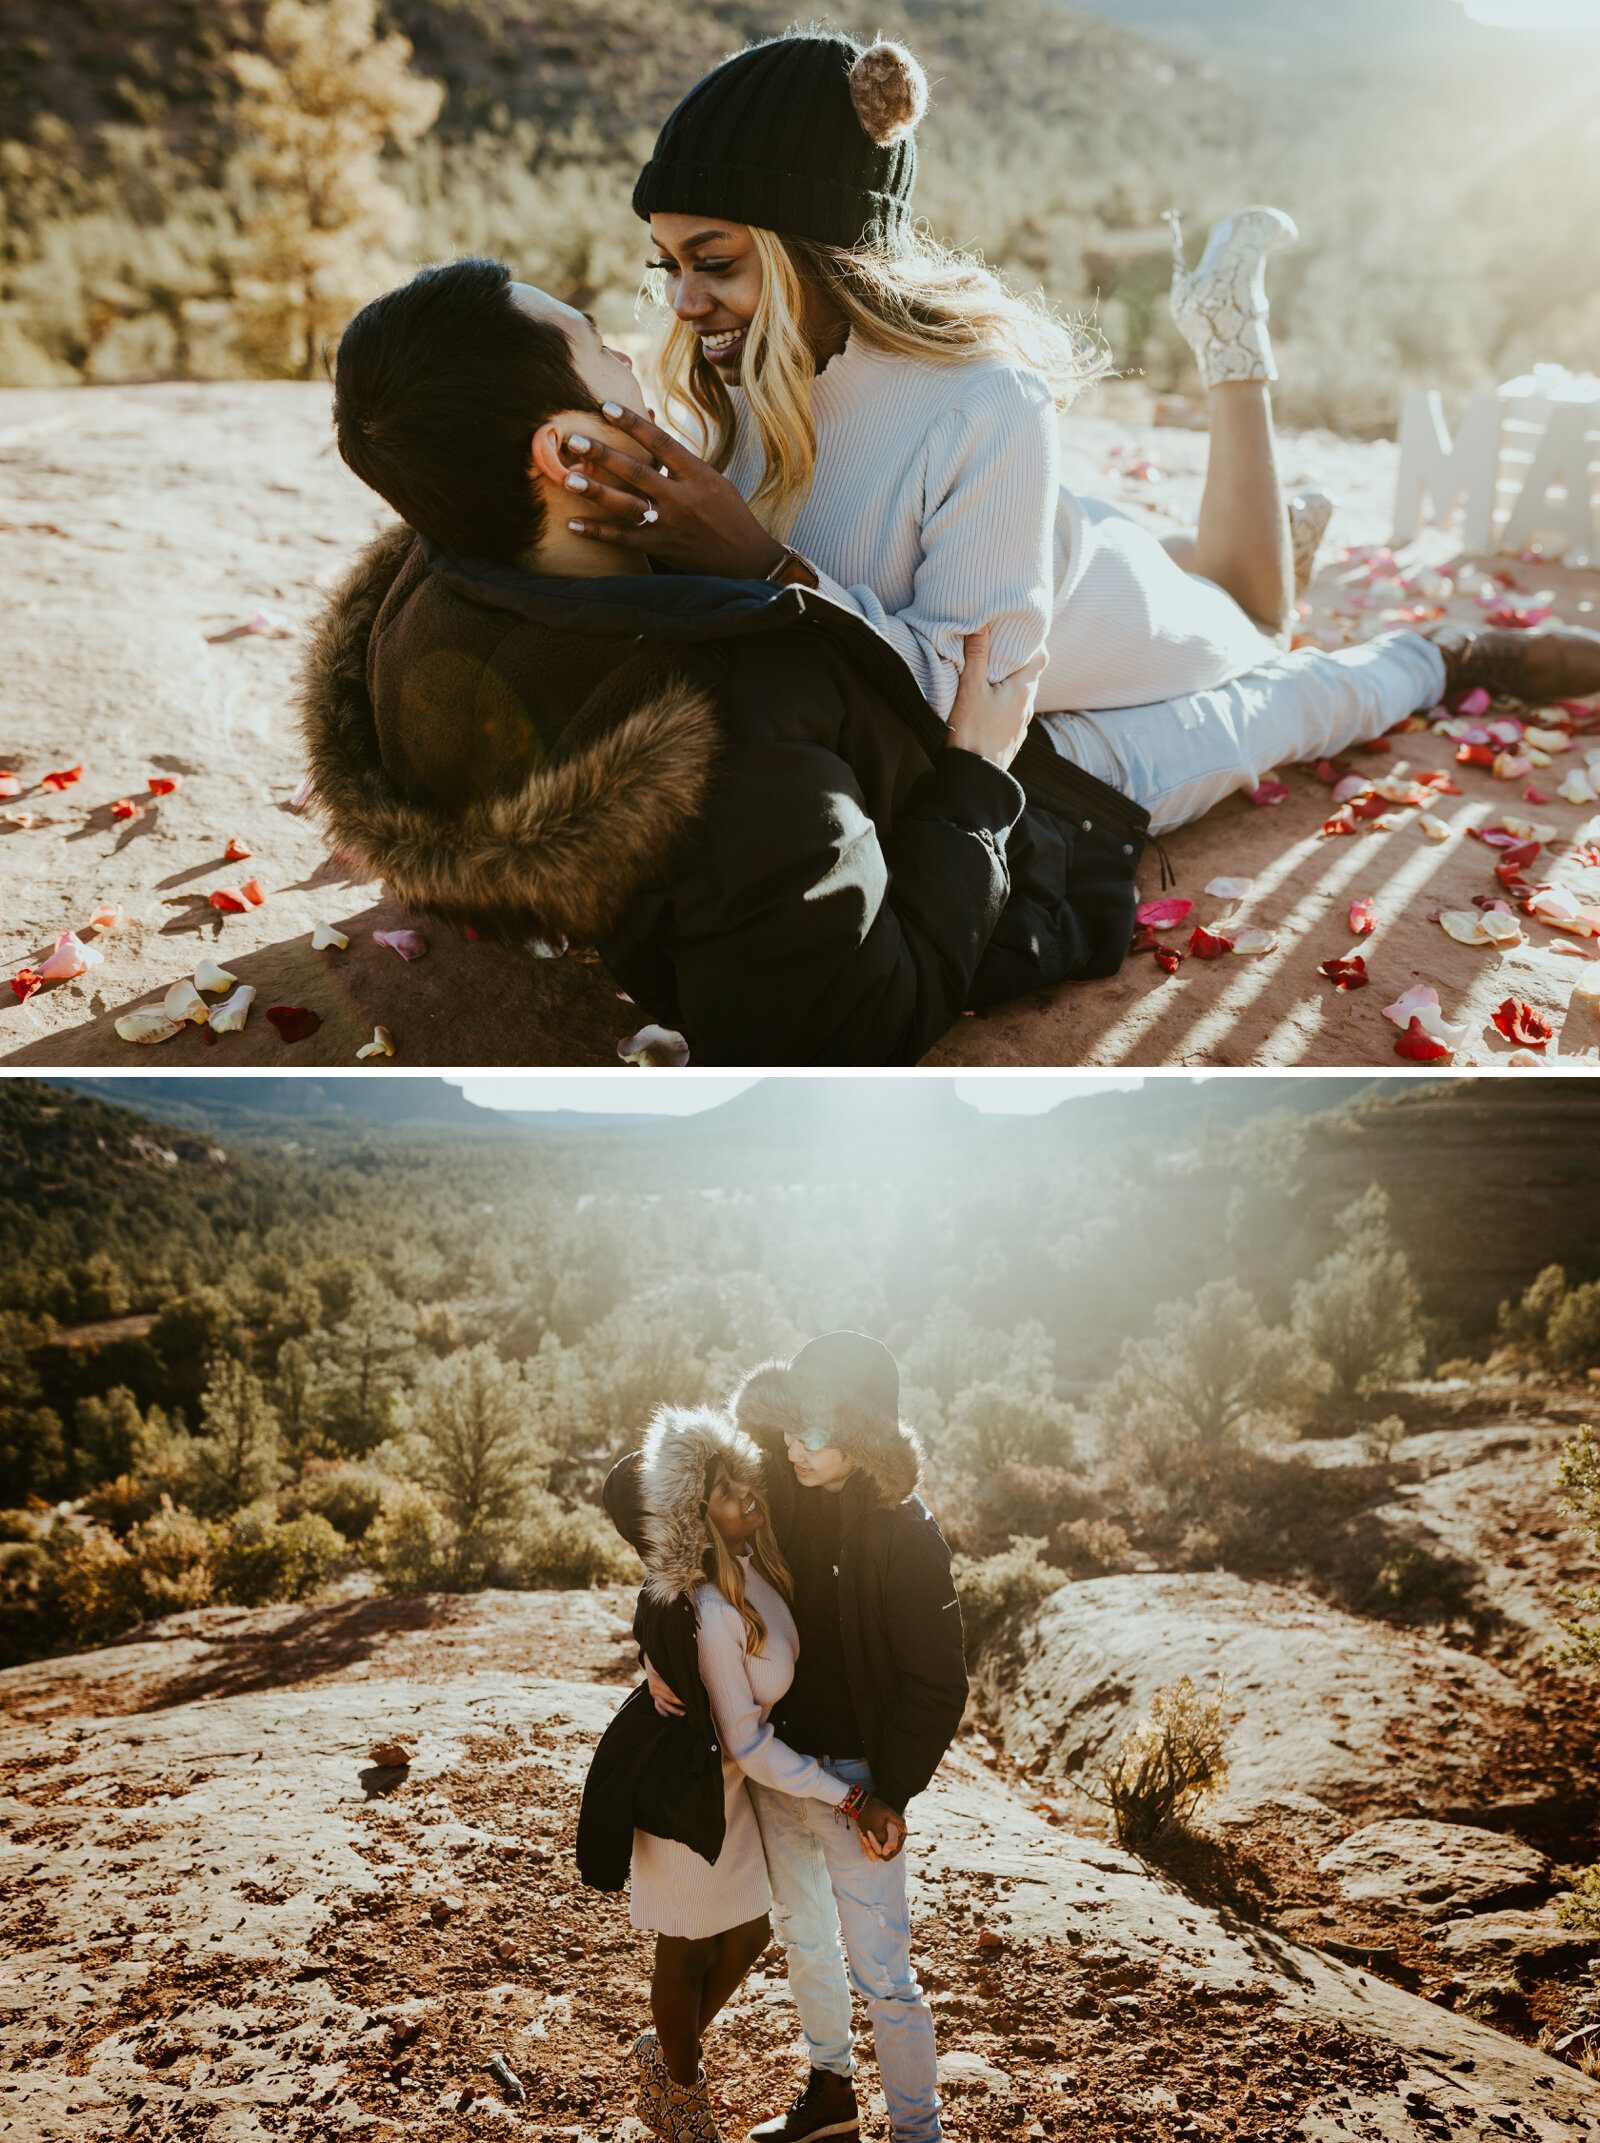 sedona arizona surprise proposal and engagement session at cathedral rock-11.jpg